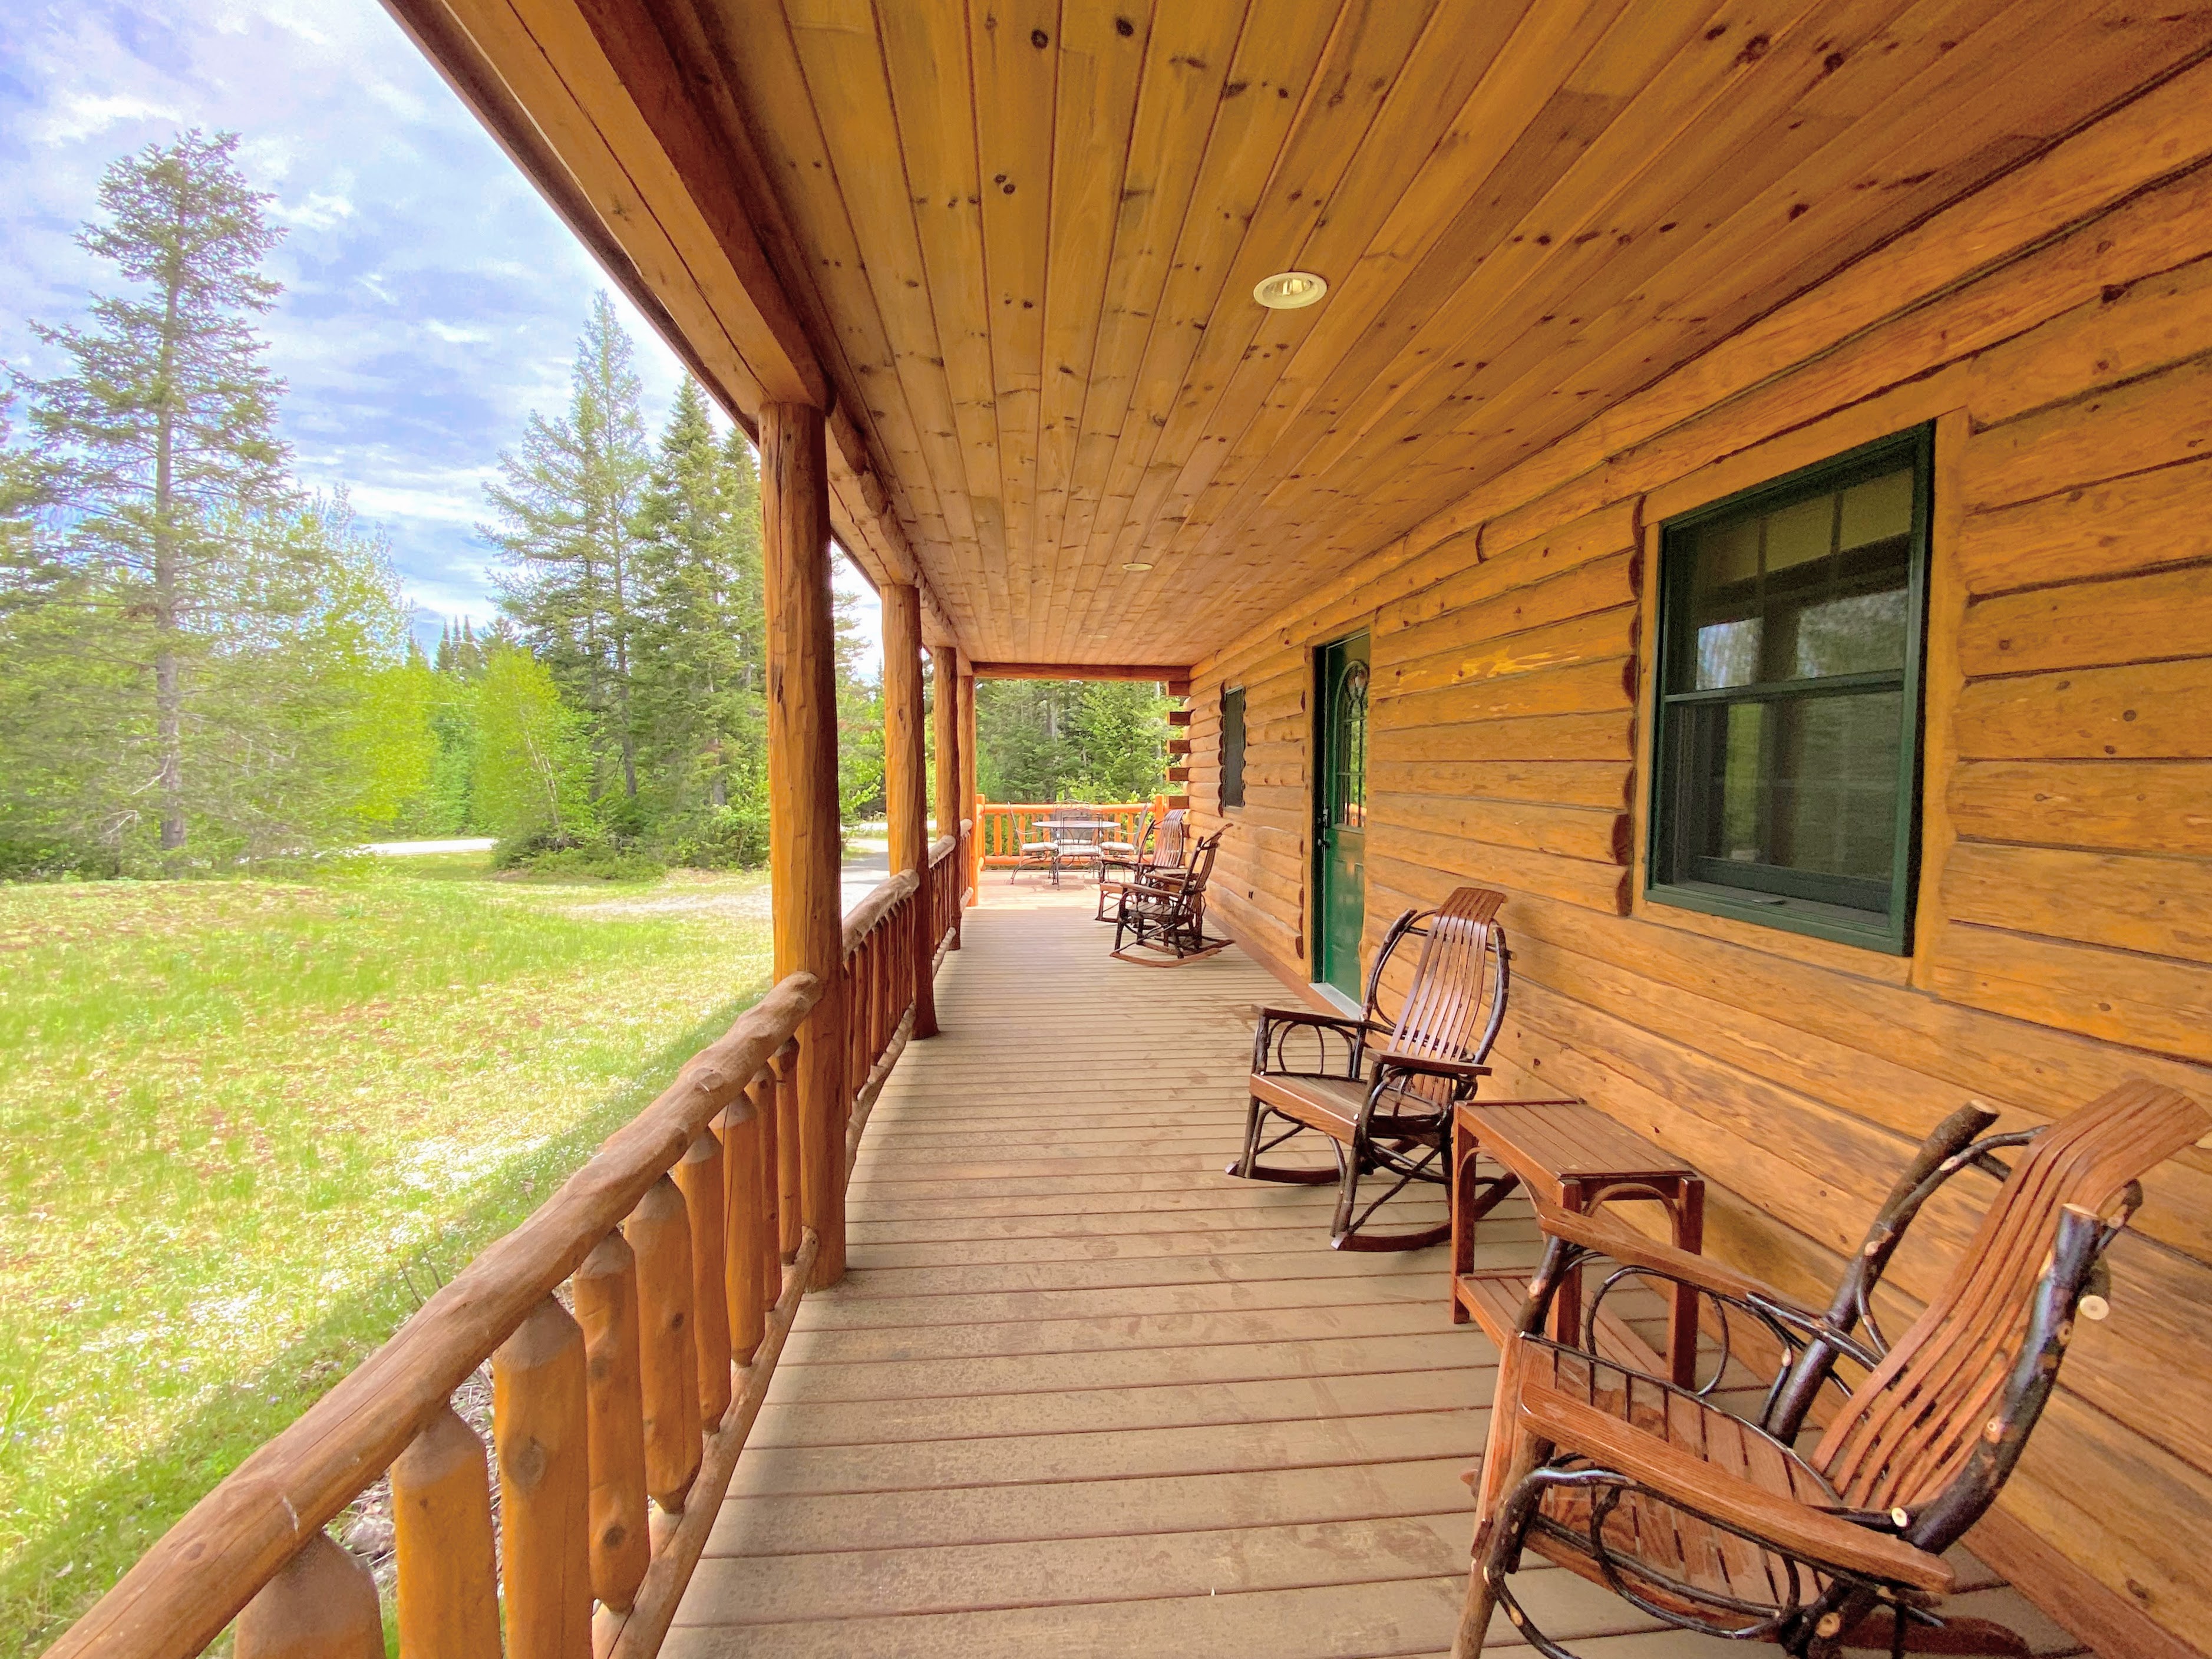 Property Image 1 - Log cabin in the heart of the White Mountains - close to Bretton Woods, Cannon, Franconia!